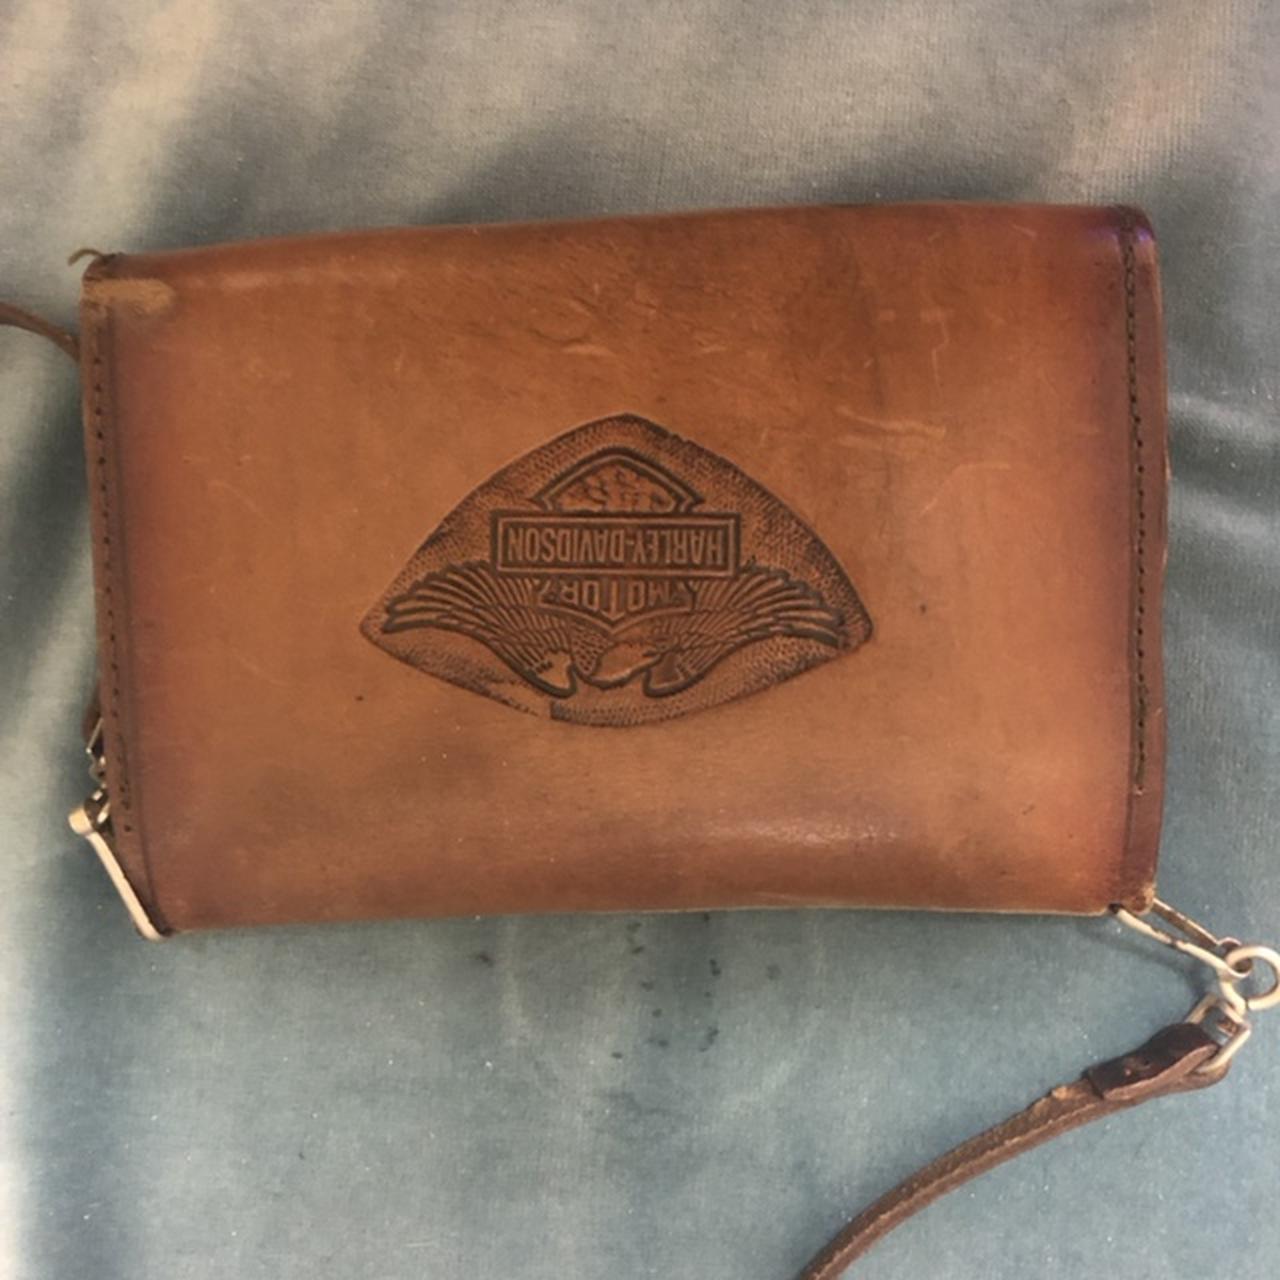 Harley-Davidson Women's Vintage B&S Embroidery Leather Coin Pouch